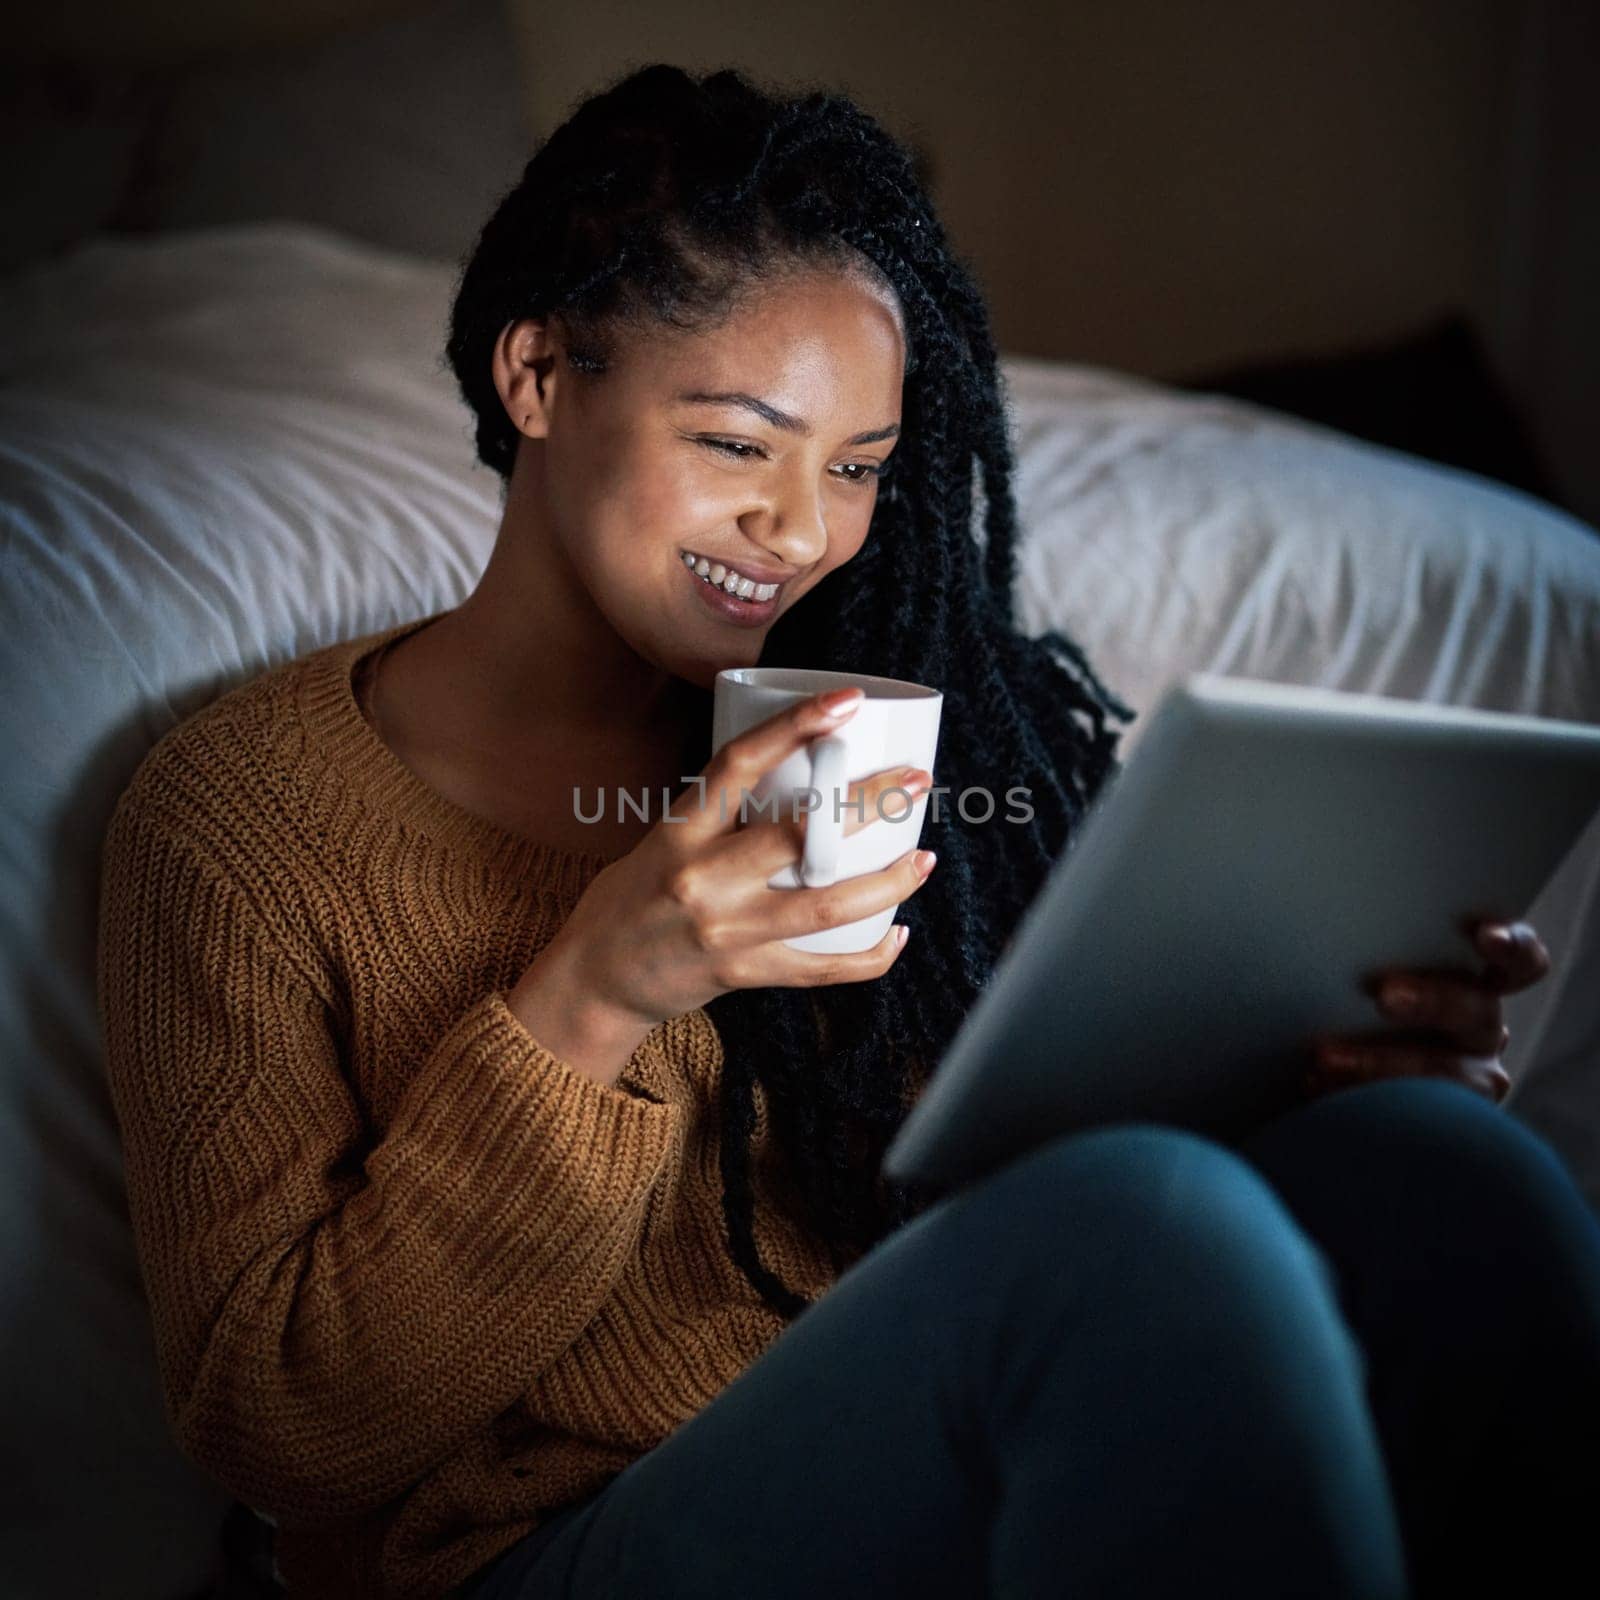 Indulging in some laziness after a long day. a relaxed young woman drinking coffee and using a digital tablet during the evening at home